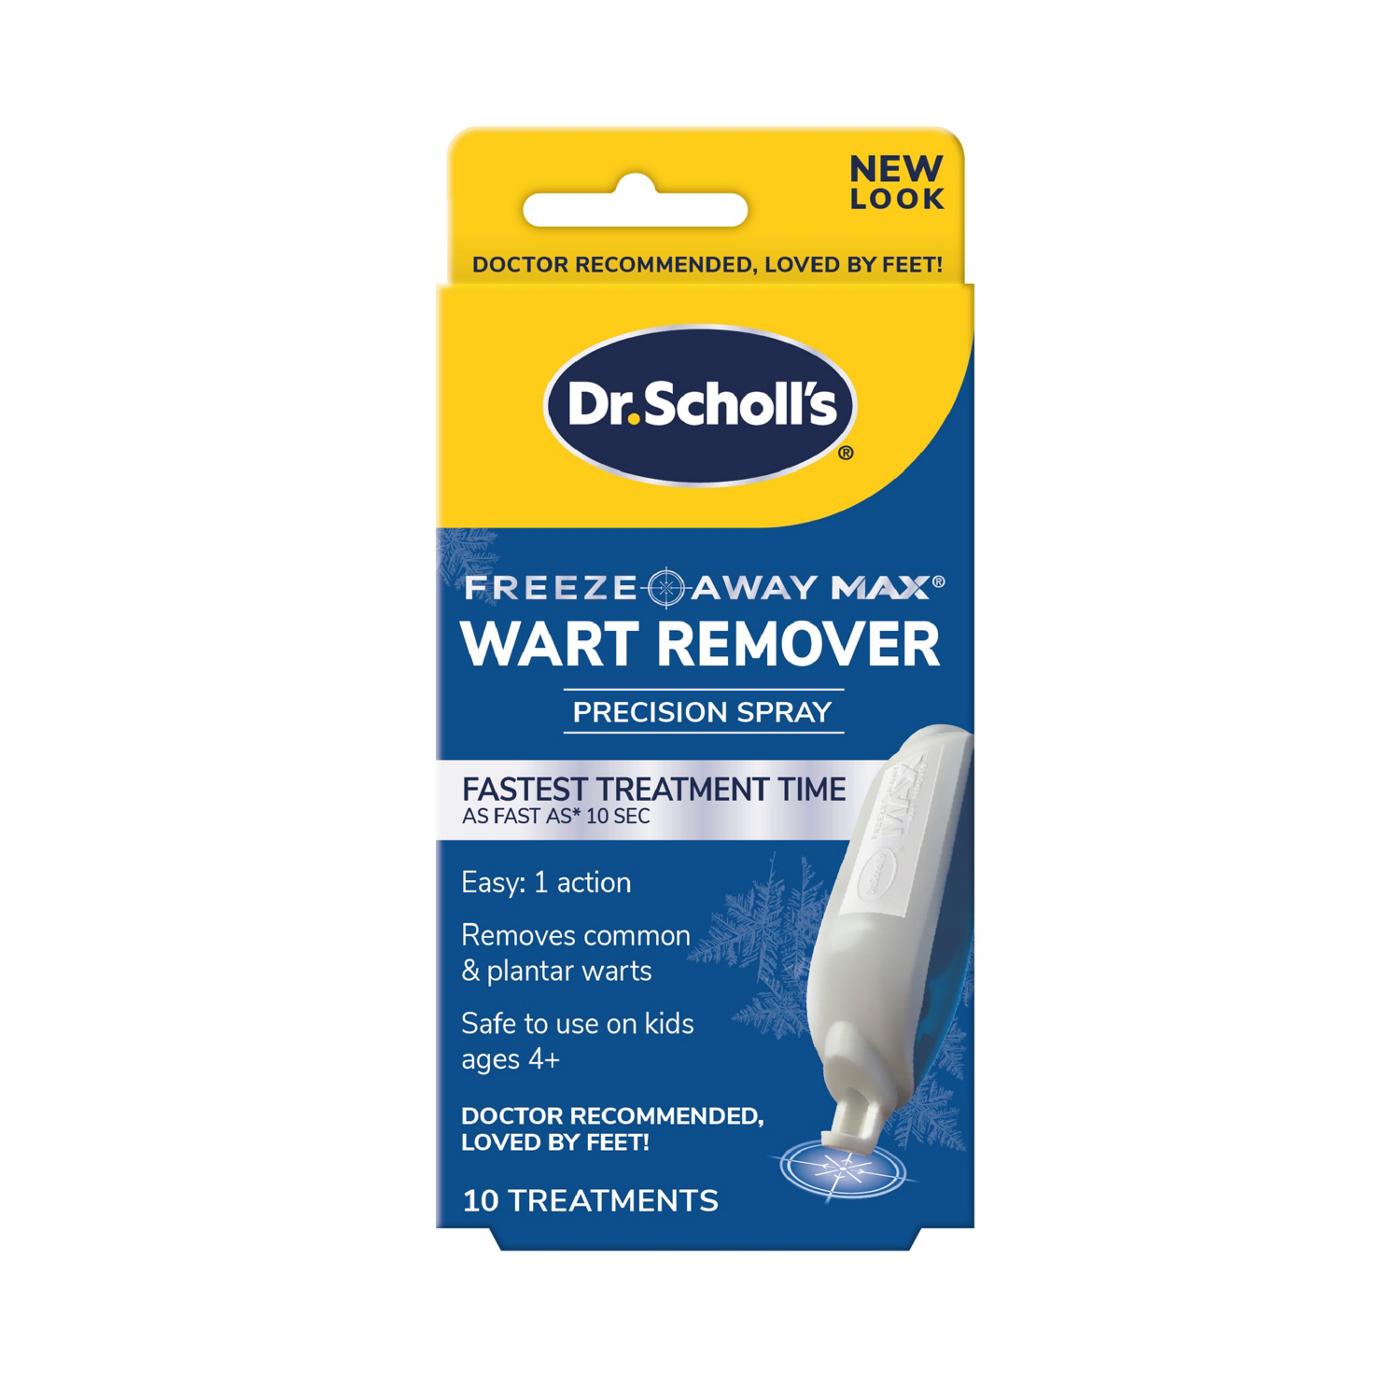 Dr. Scholl's Freese Away Max Wart Remover; image 1 of 9